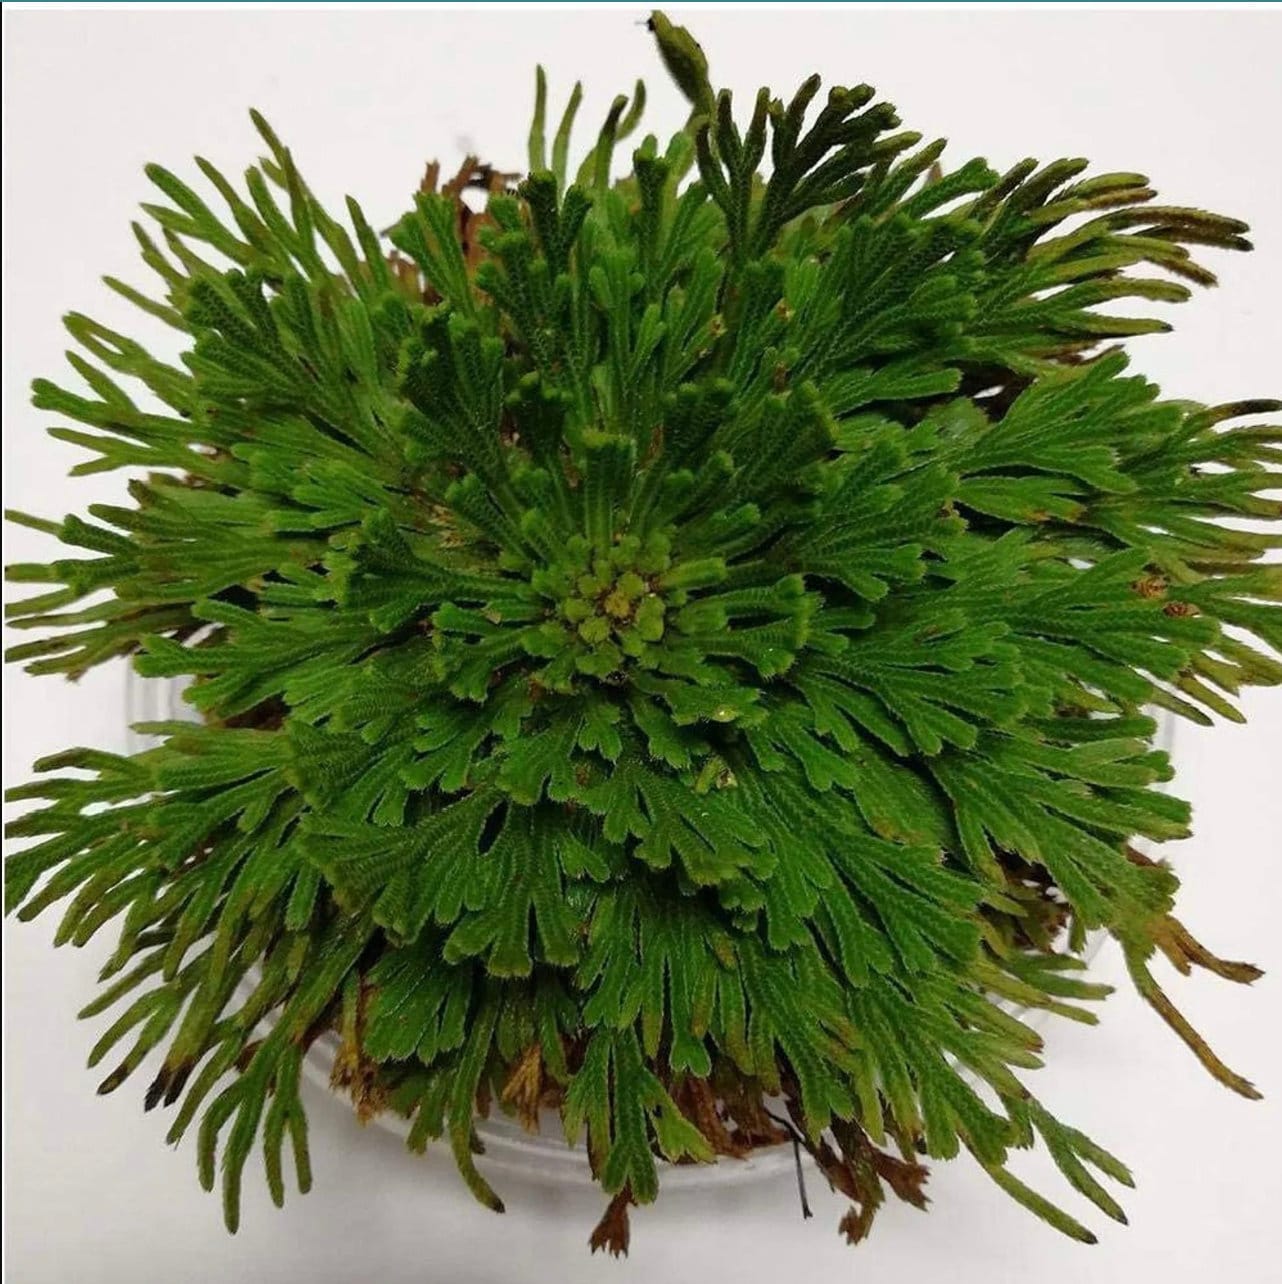 Rose of Jericho: Benefits, Uses, and Precautions